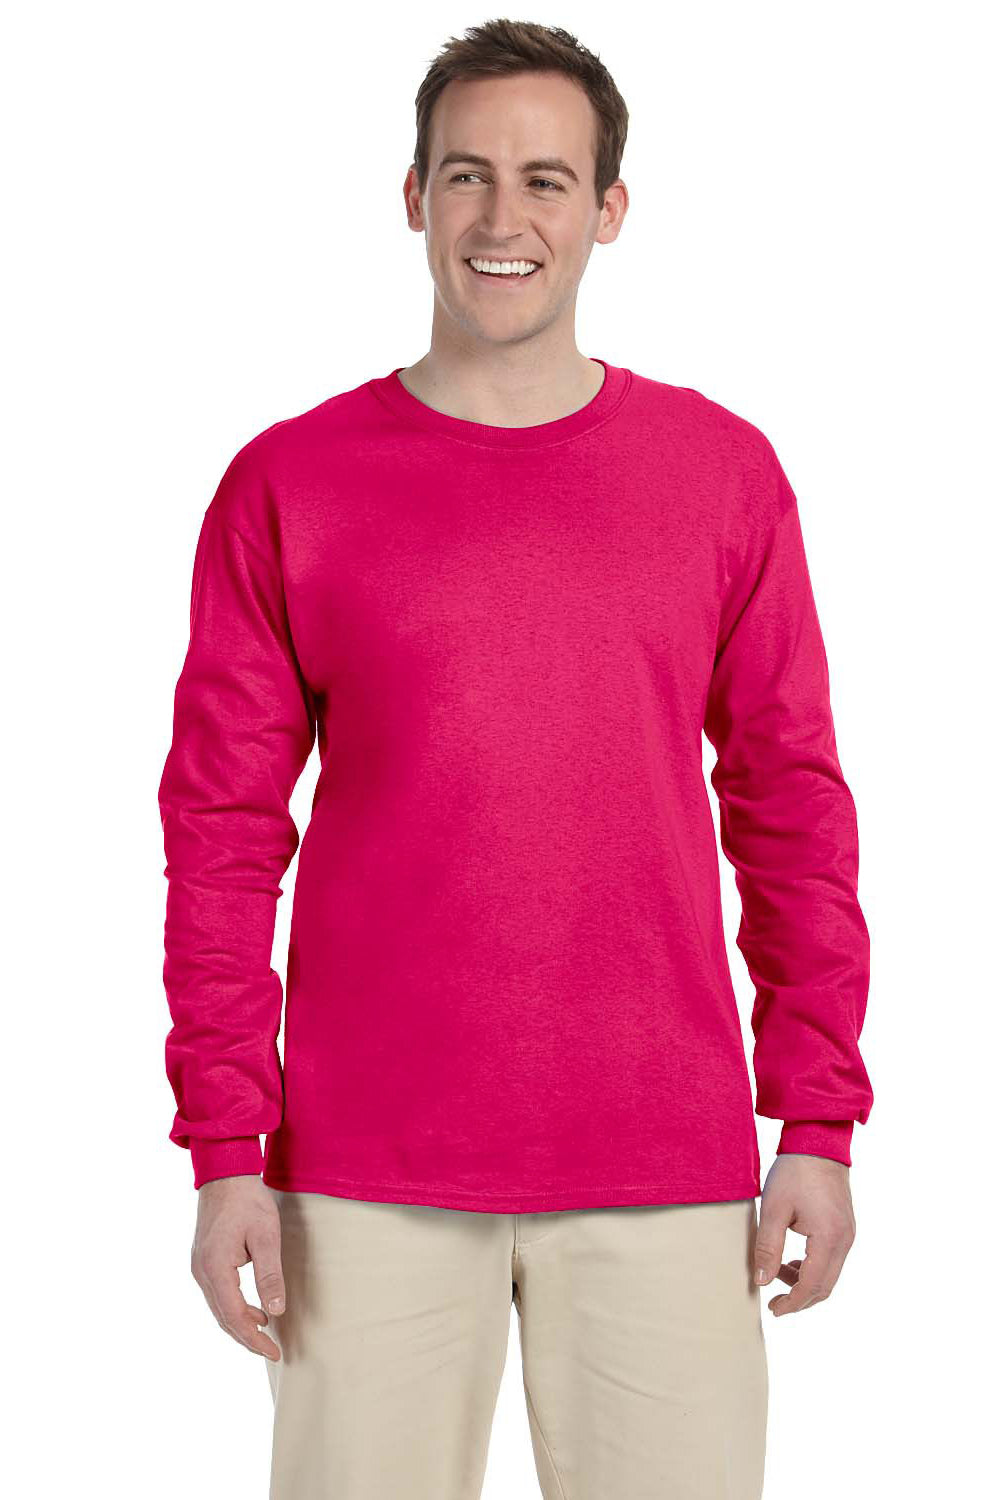 Fruit Of The Loom 4930 Mens HD Jersey Long Sleeve Crewneck T-Shirt Cyber Pink Front